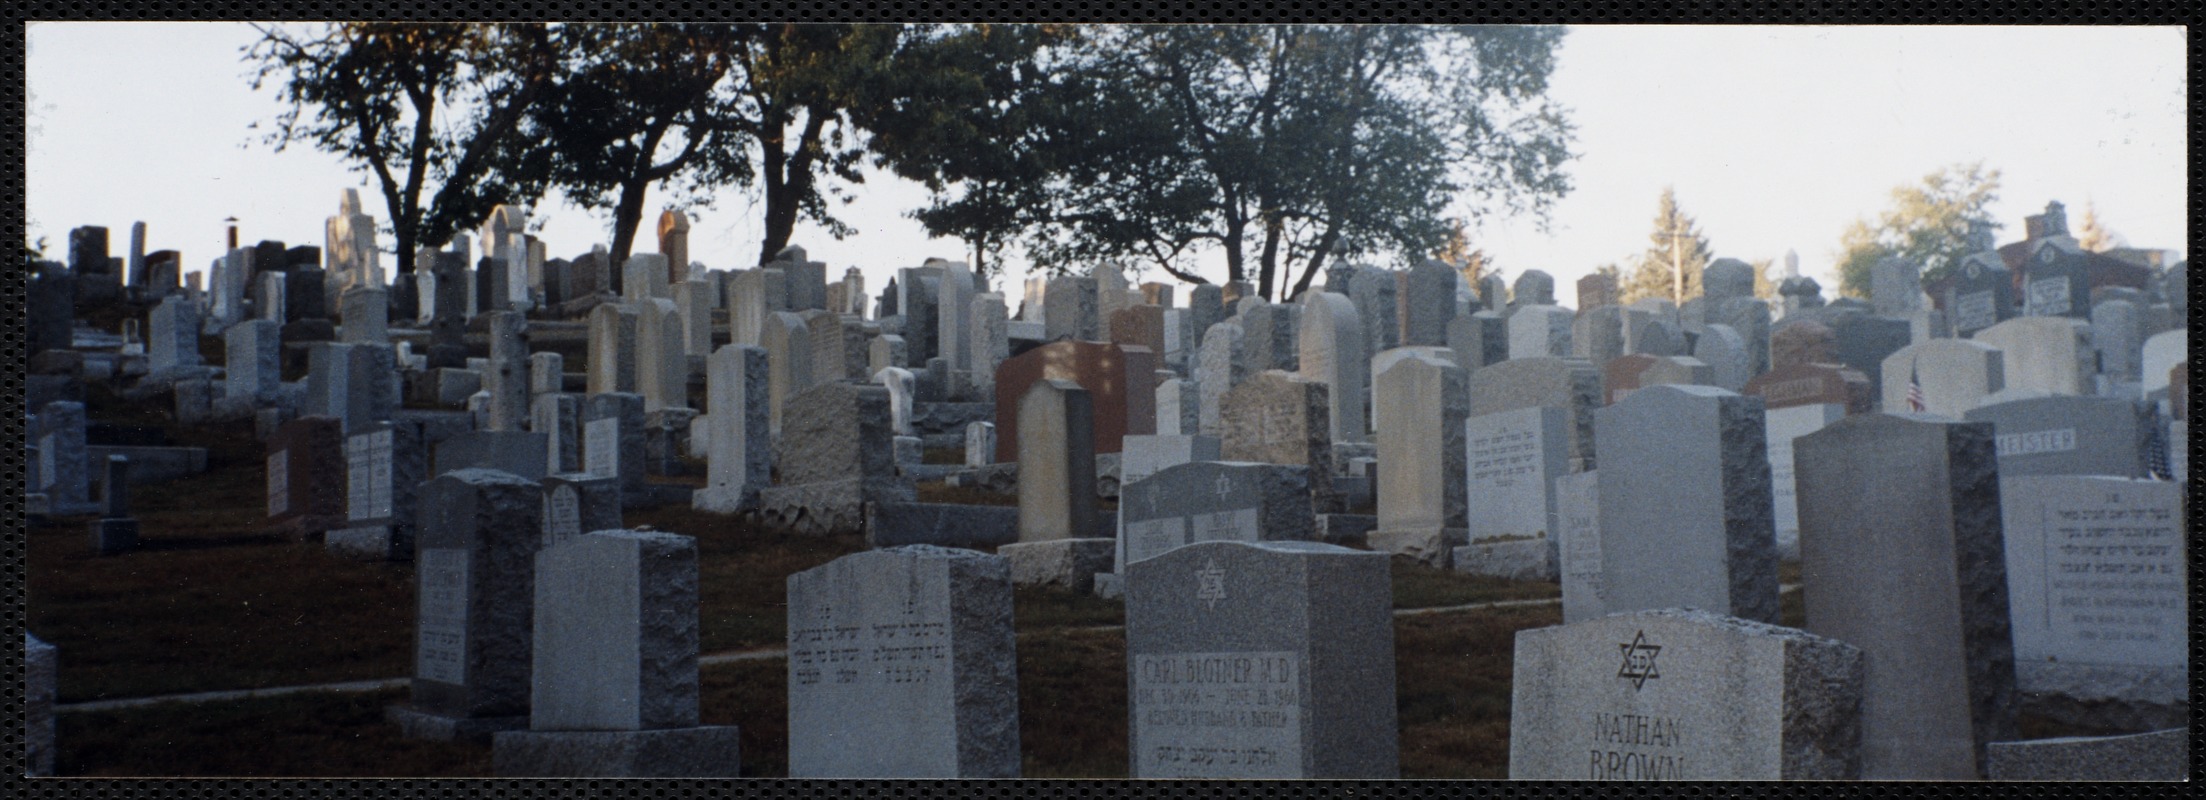 Jewish cemeteries, Beacon St., Lawrence, 1998 September